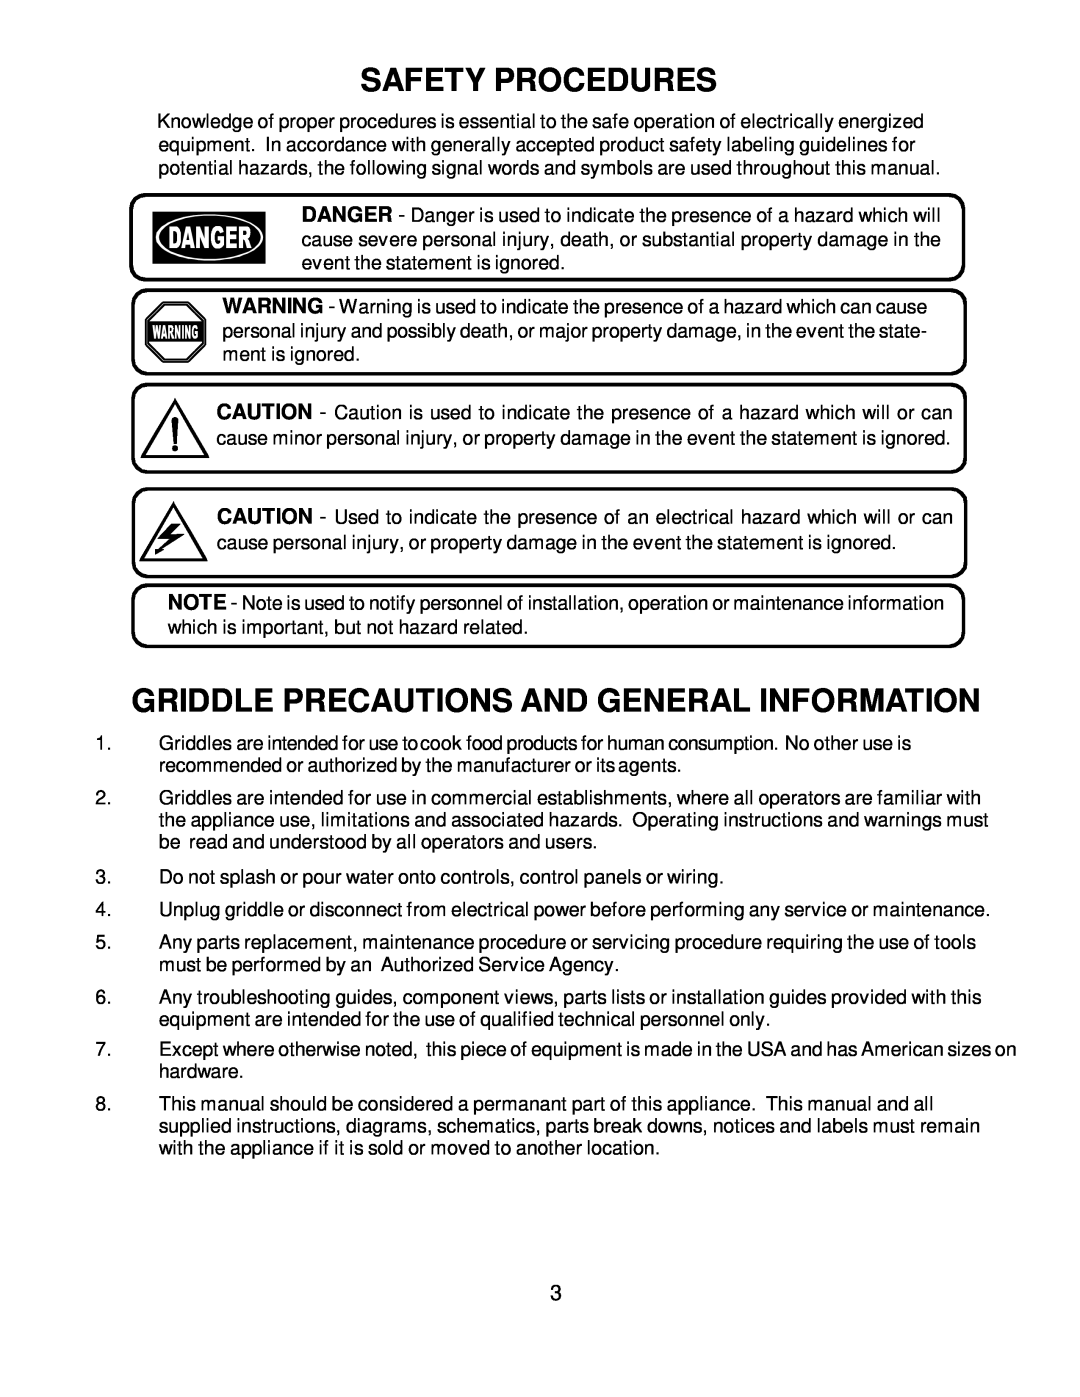 Wells Bulit-In Electric Griddles operation manual Safety Procedures, Griddle Precautions And General Information 